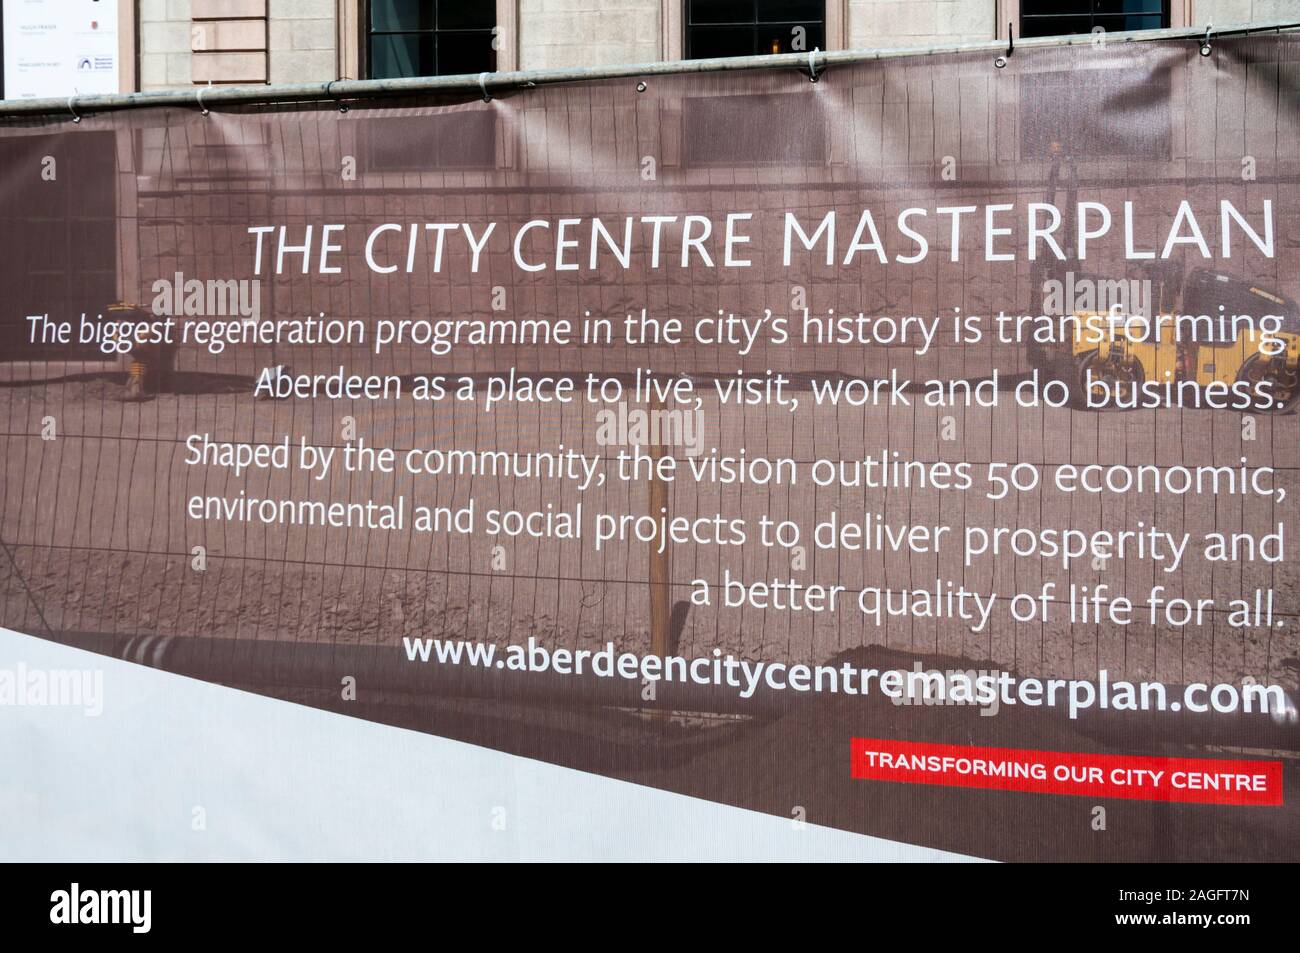 A banner promoting the Aberdeen City Centre Masterplan for regeneration of the city. Stock Photo